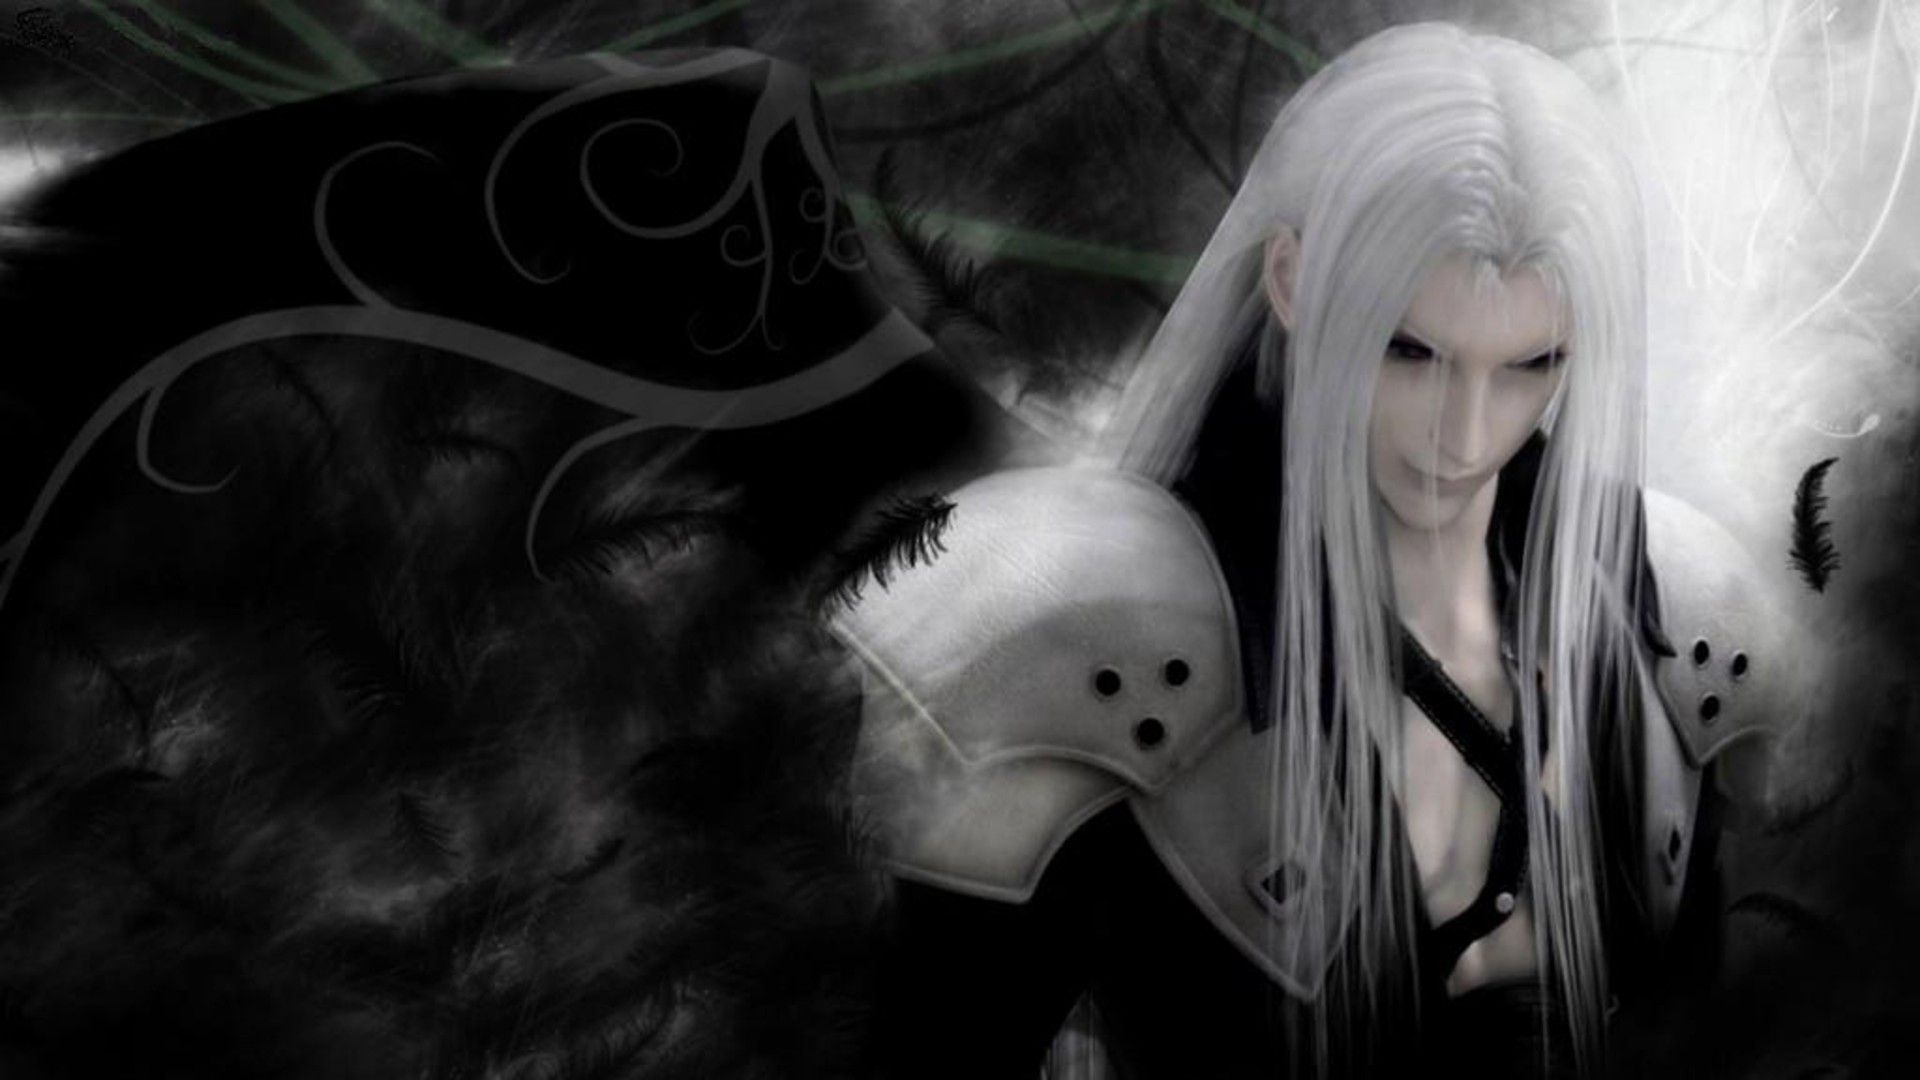 1920x1080 998 Final Fantasy HD Wallpapers | Backgrounds - Wallpaper Abyss - Page 4